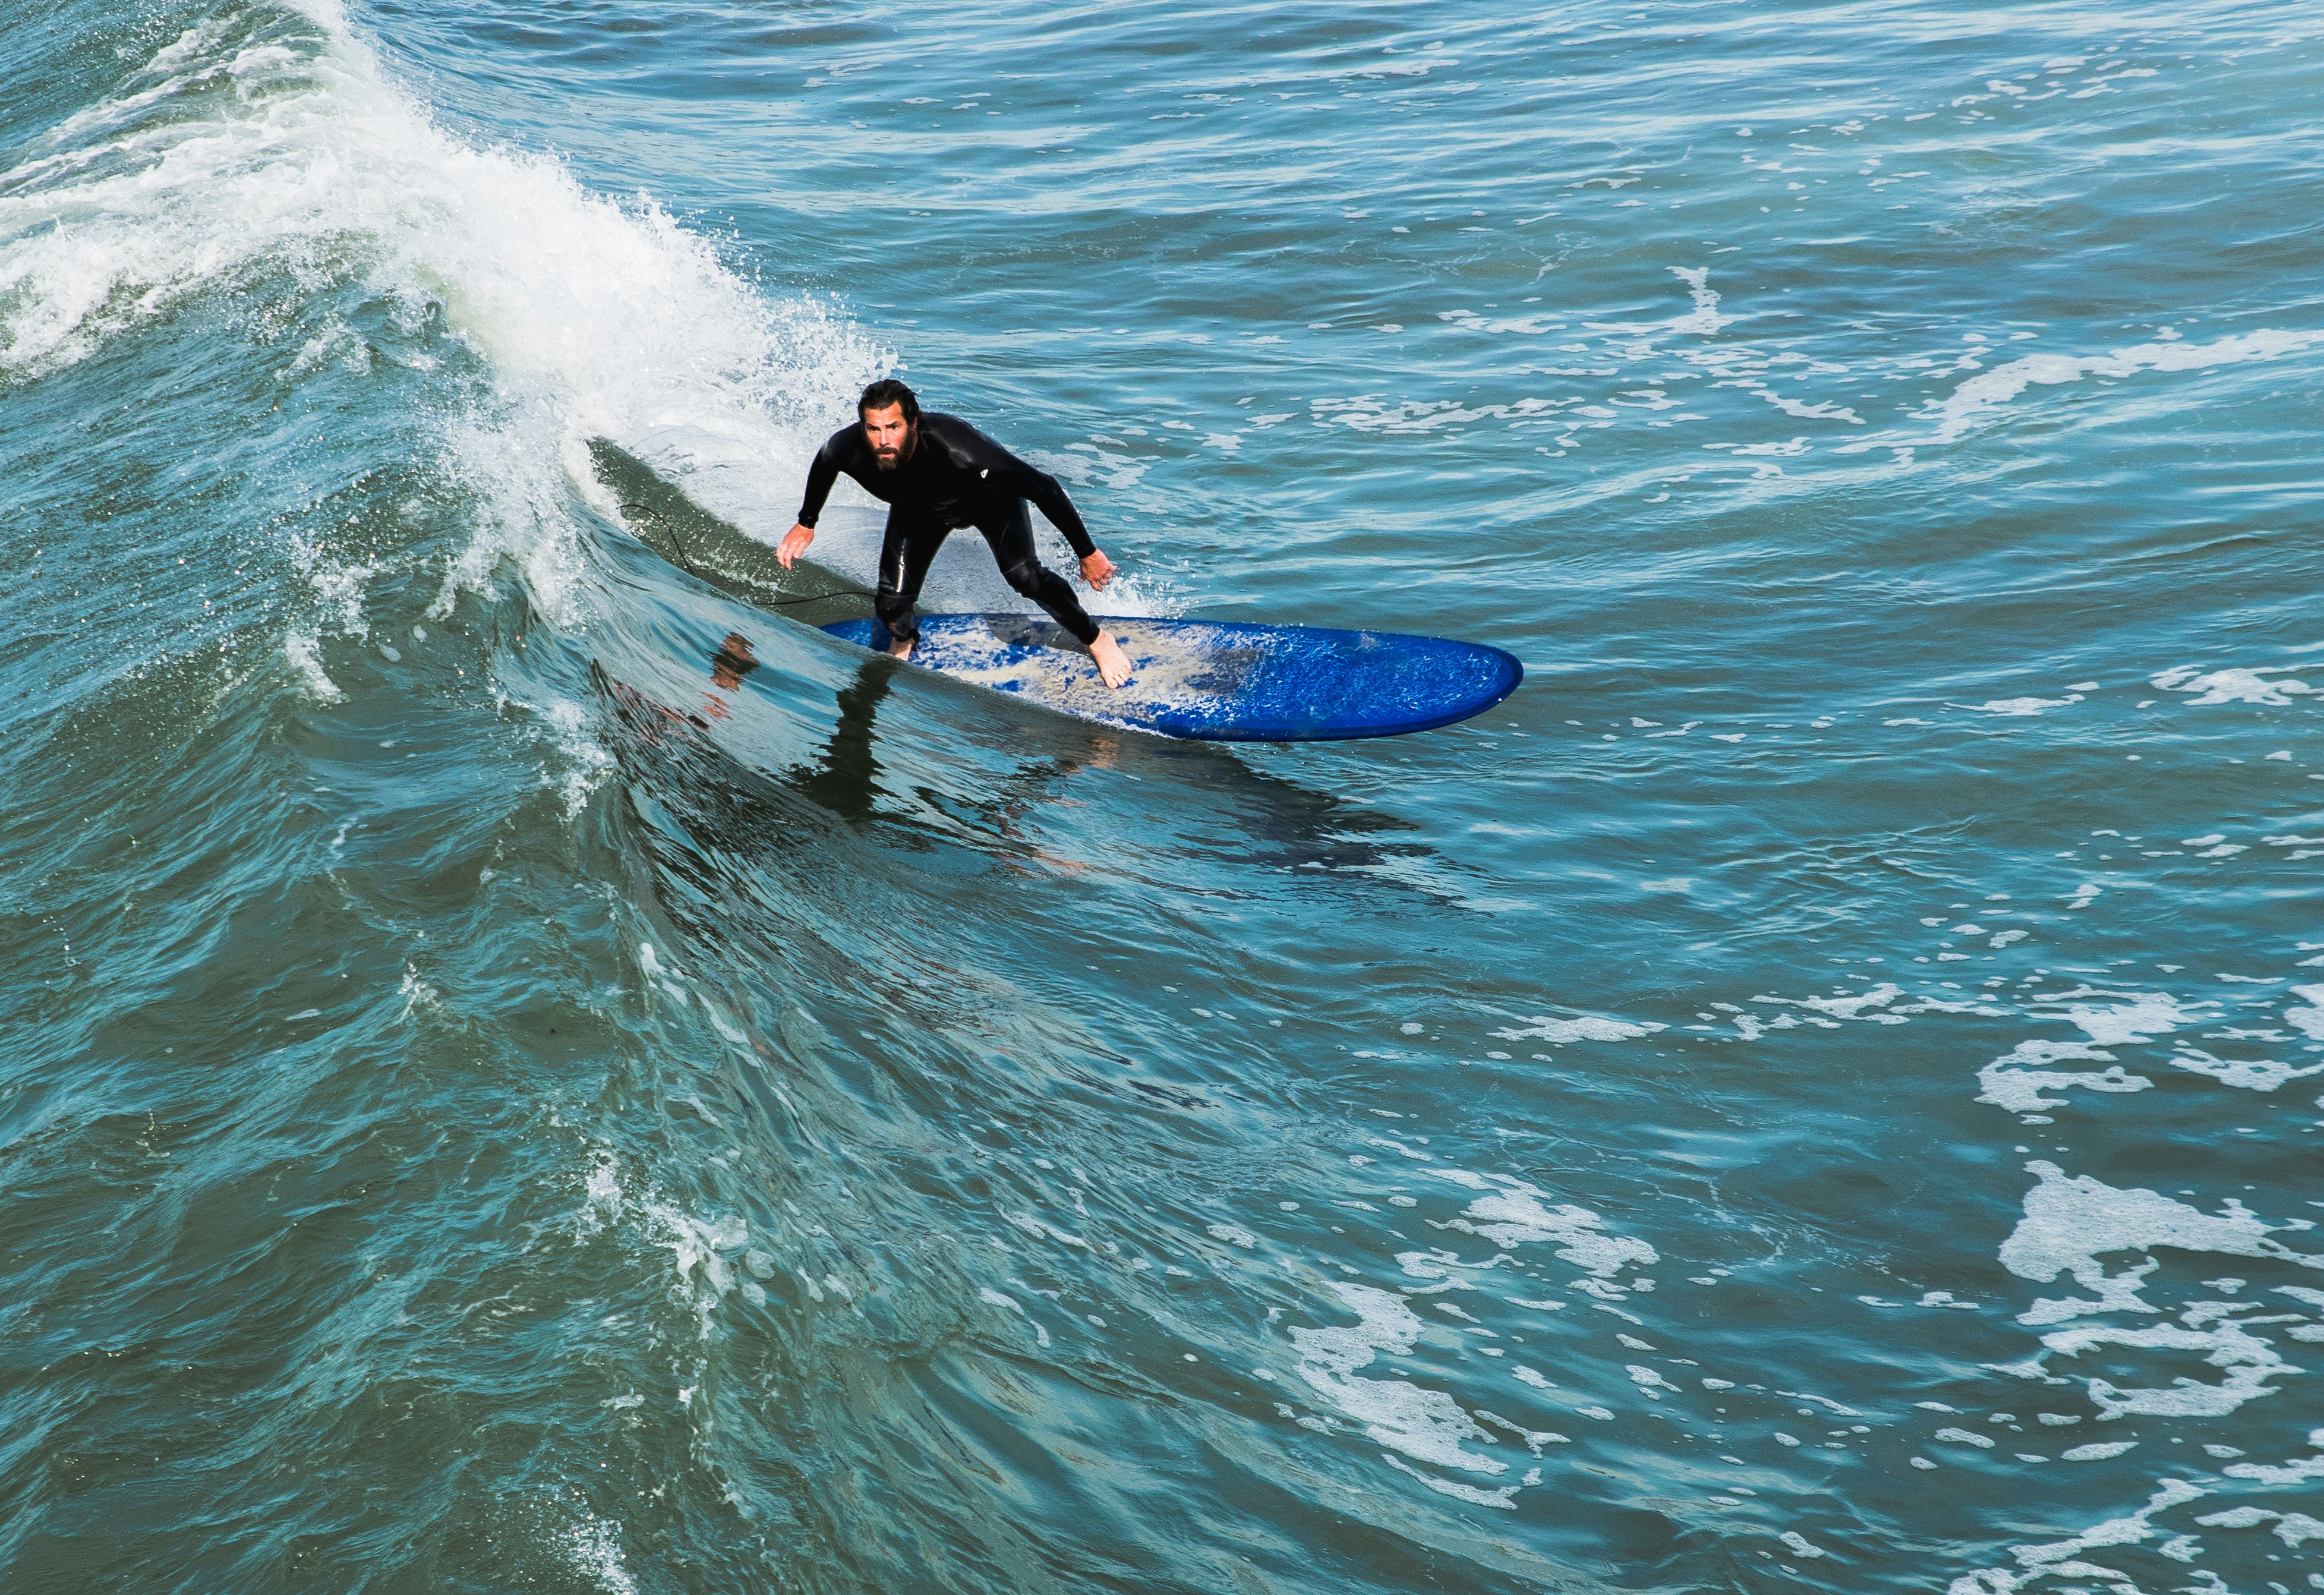 man in black wet suit surfing on wave during daytime